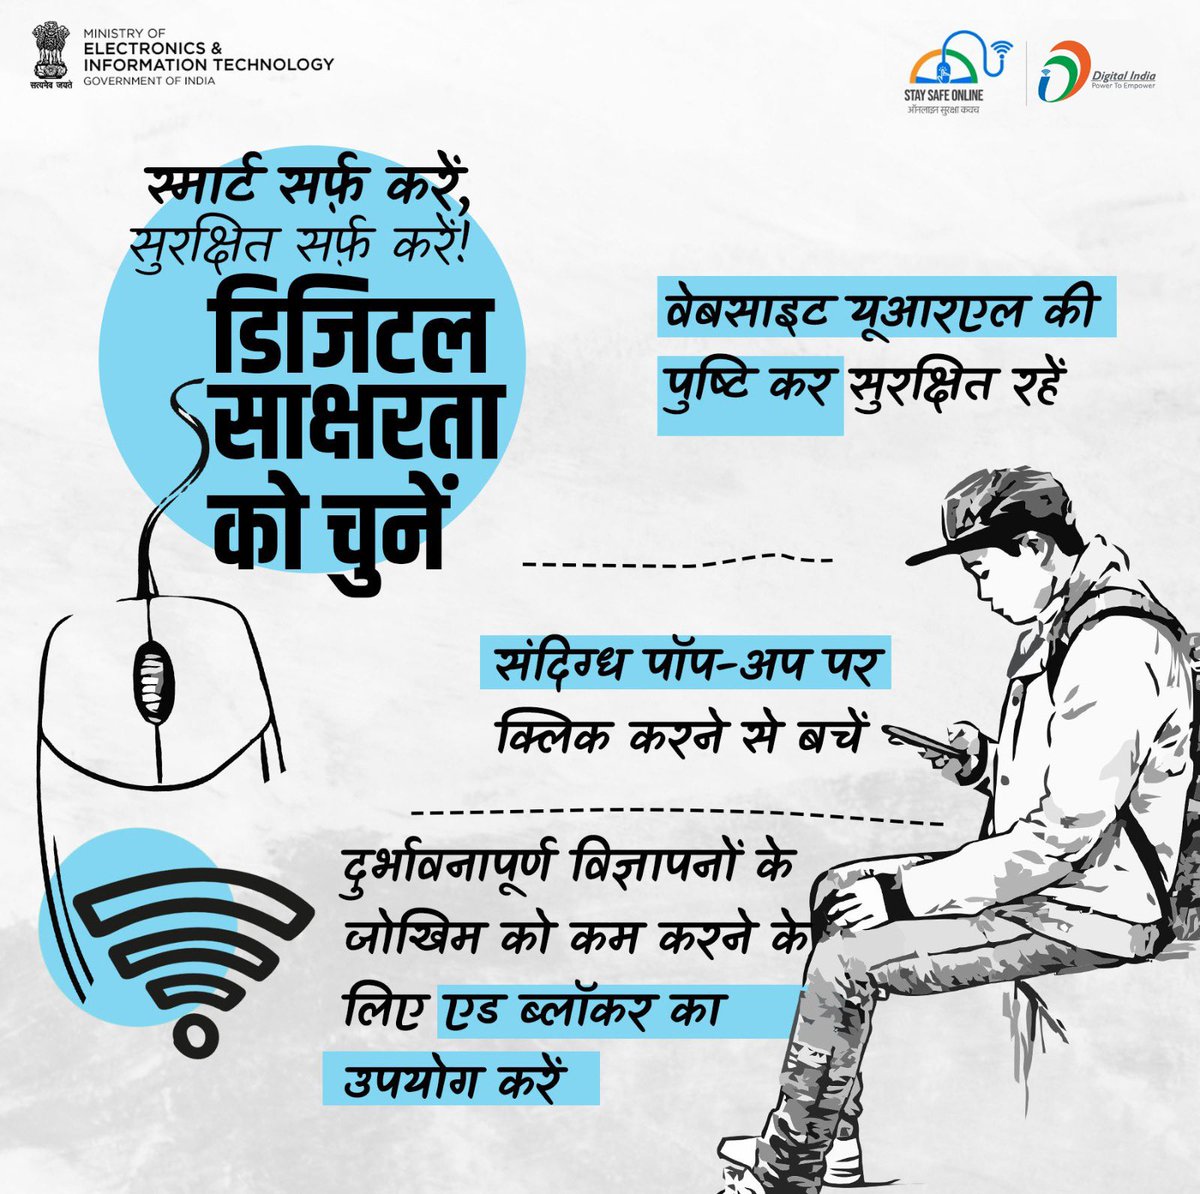 Surf smart! 
Follow digital best practices to be cyber safe. Follow these steps. #DigitalIndia #cybersecurity